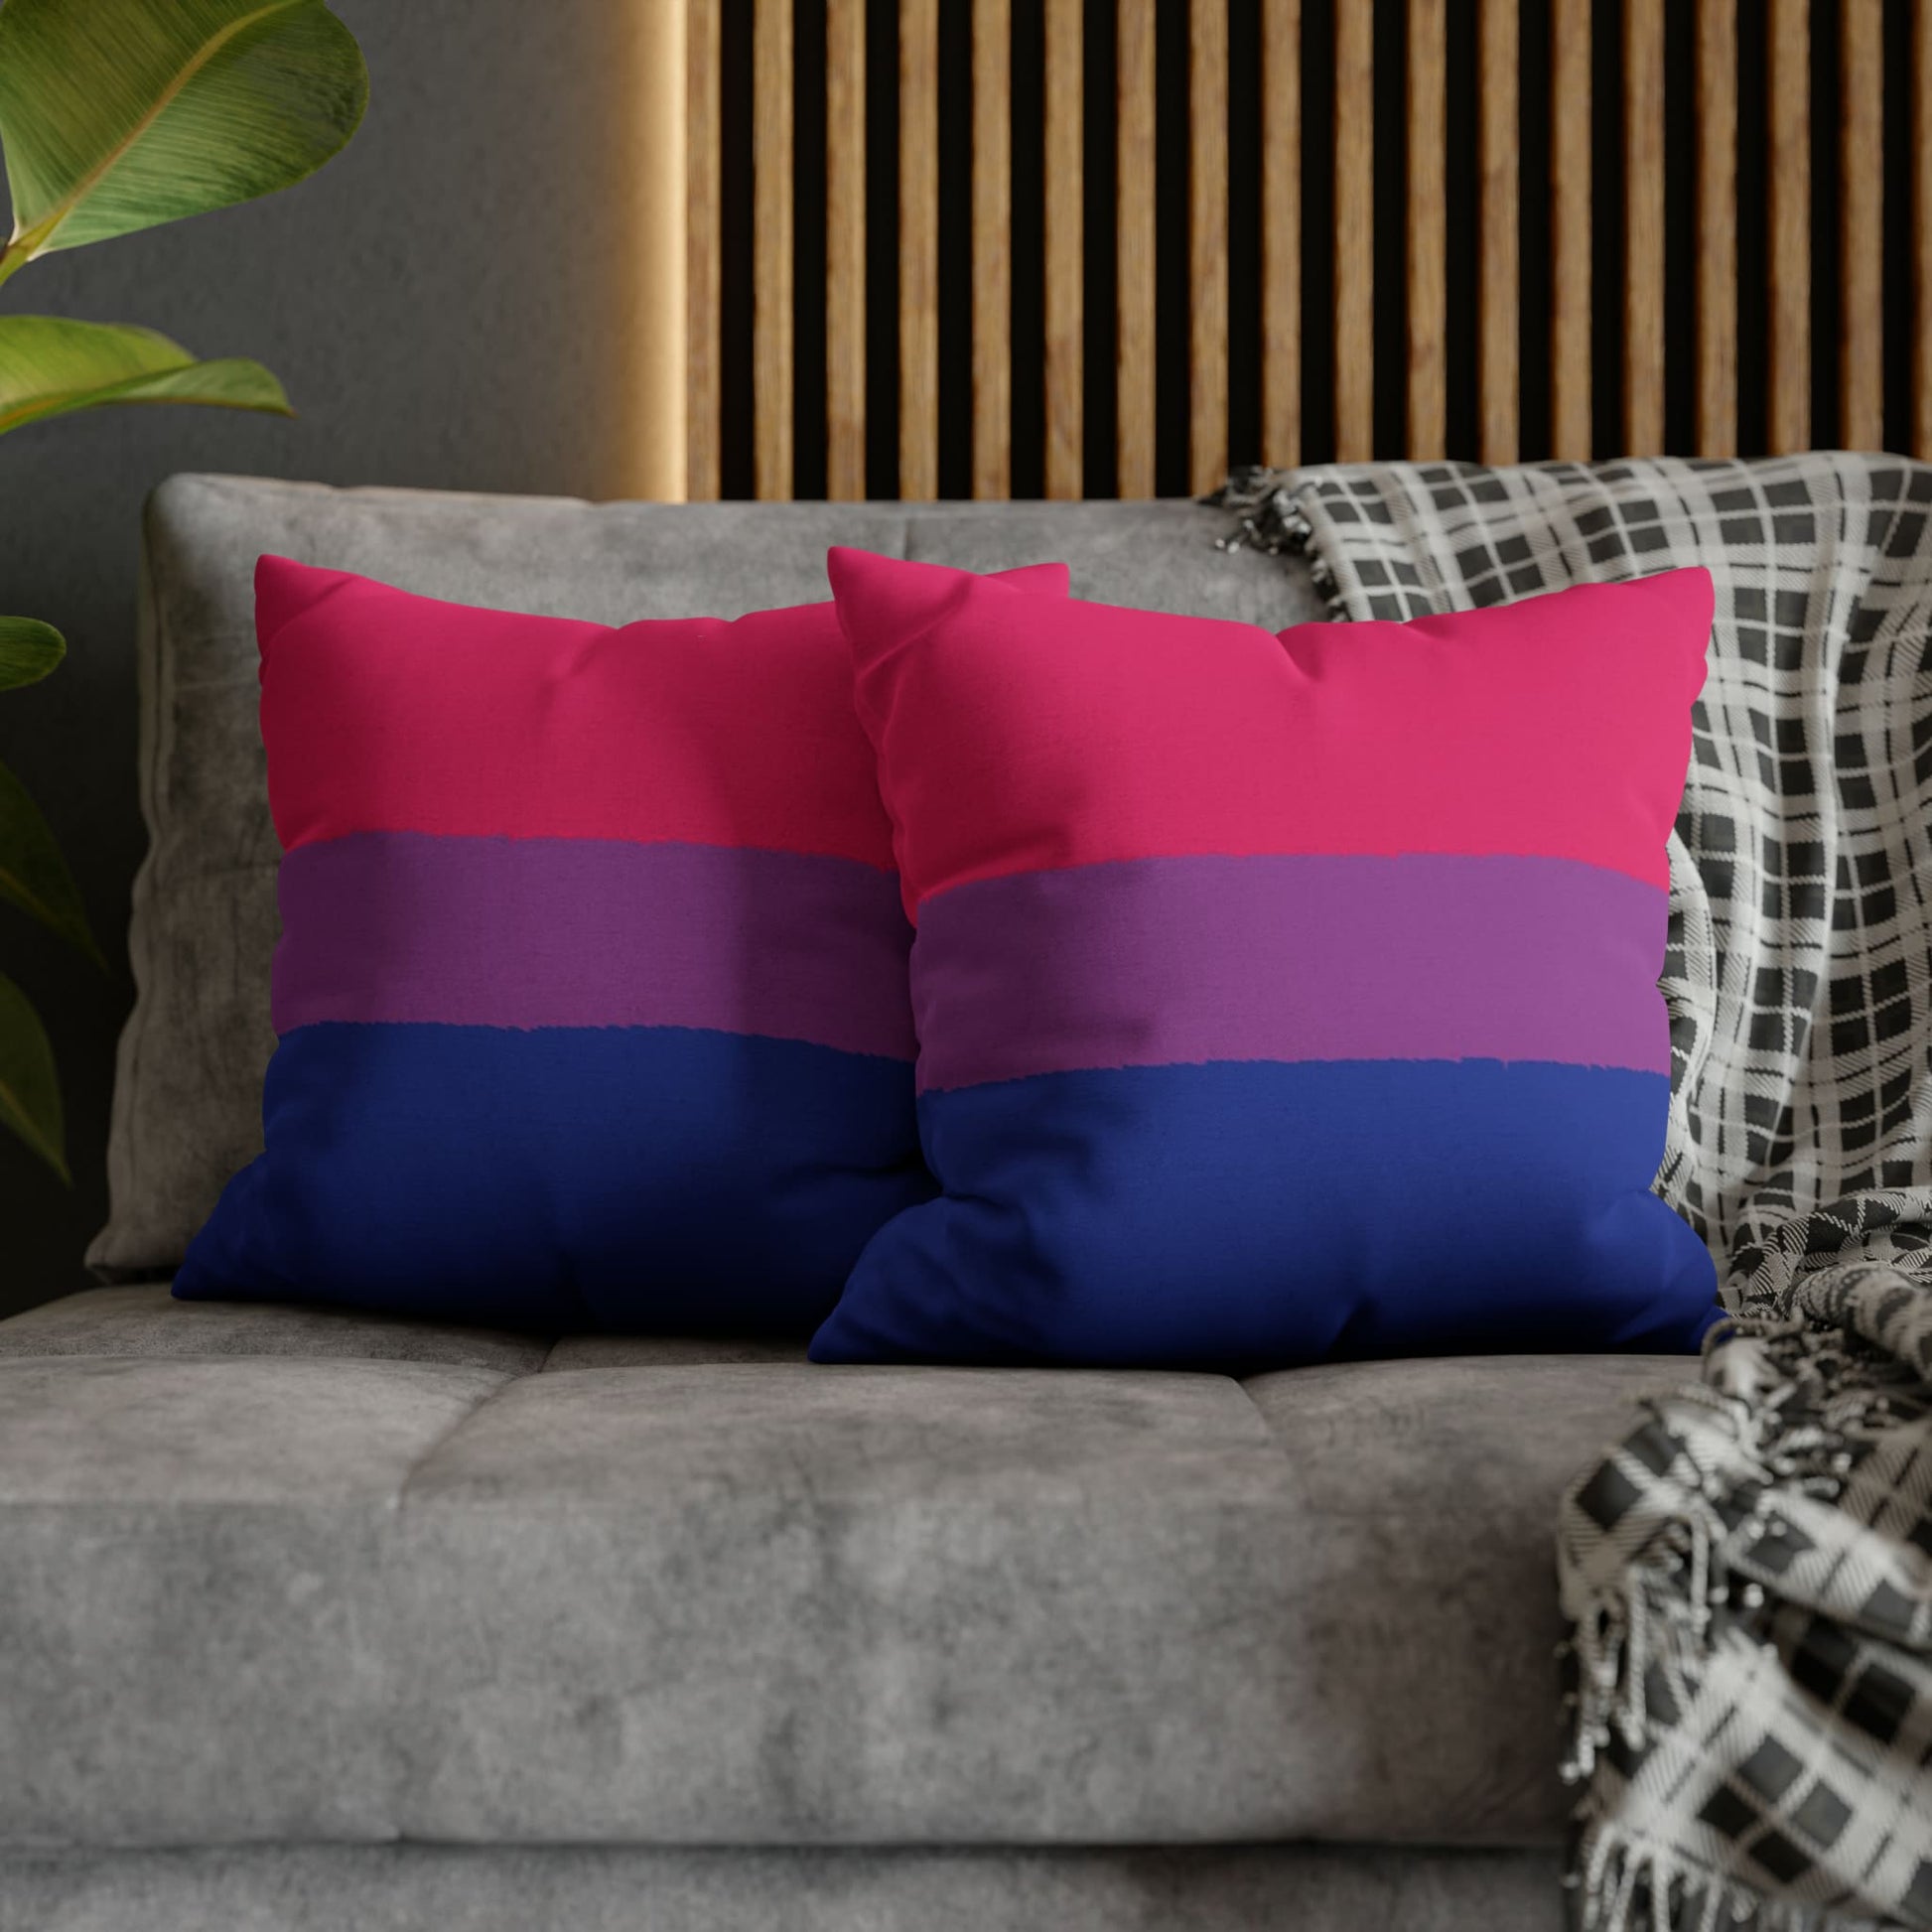 2 bisexual pillows on couch 